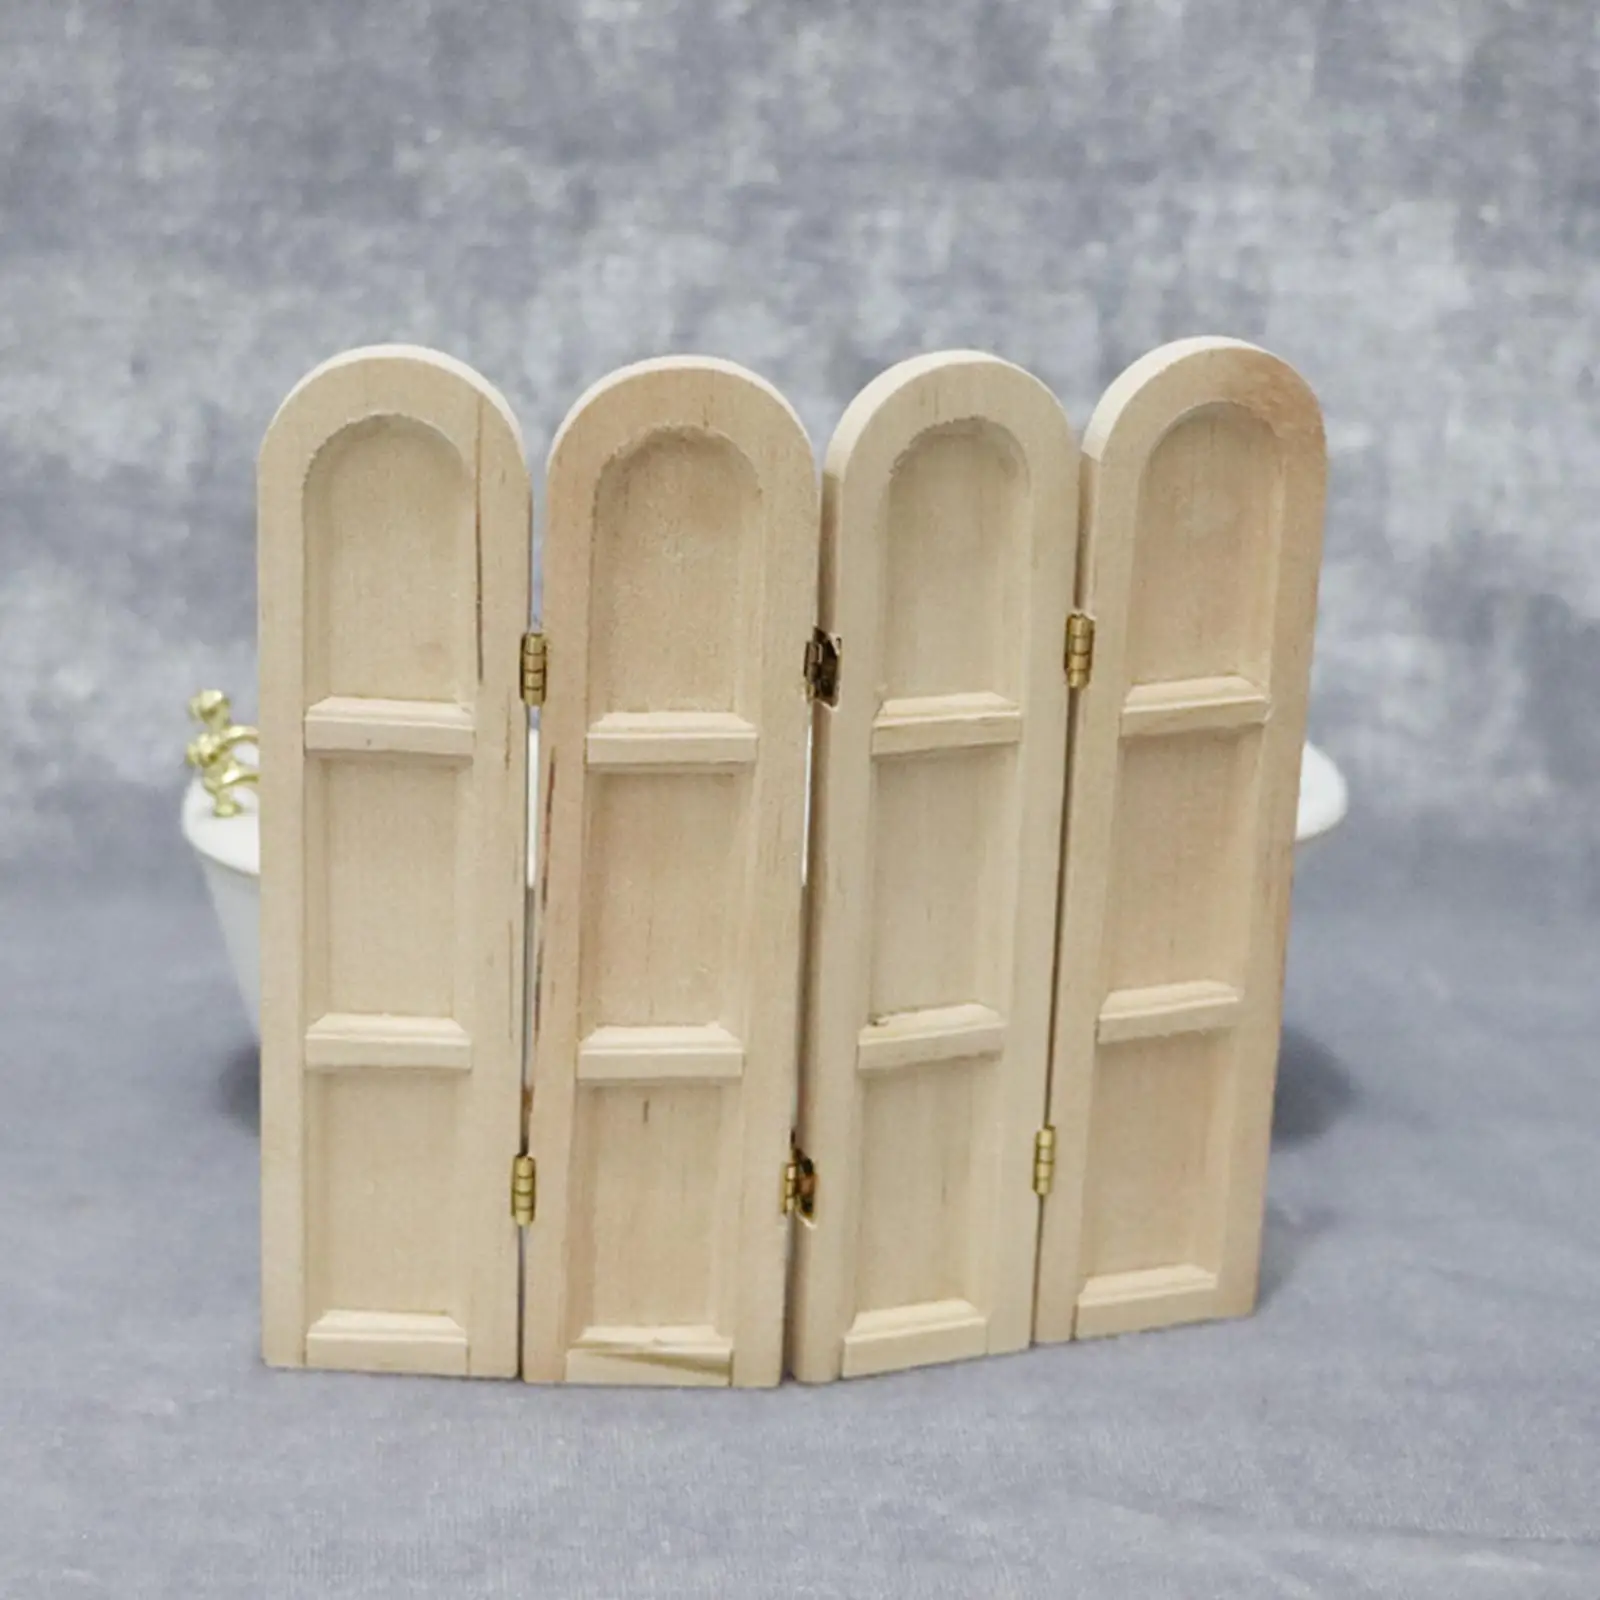 1:12 Dollhouse Folding Screen Wood Retro Photo Props Dollhouse Furniture for Living Room Bedroom Office Kids Play Toy Life Scene